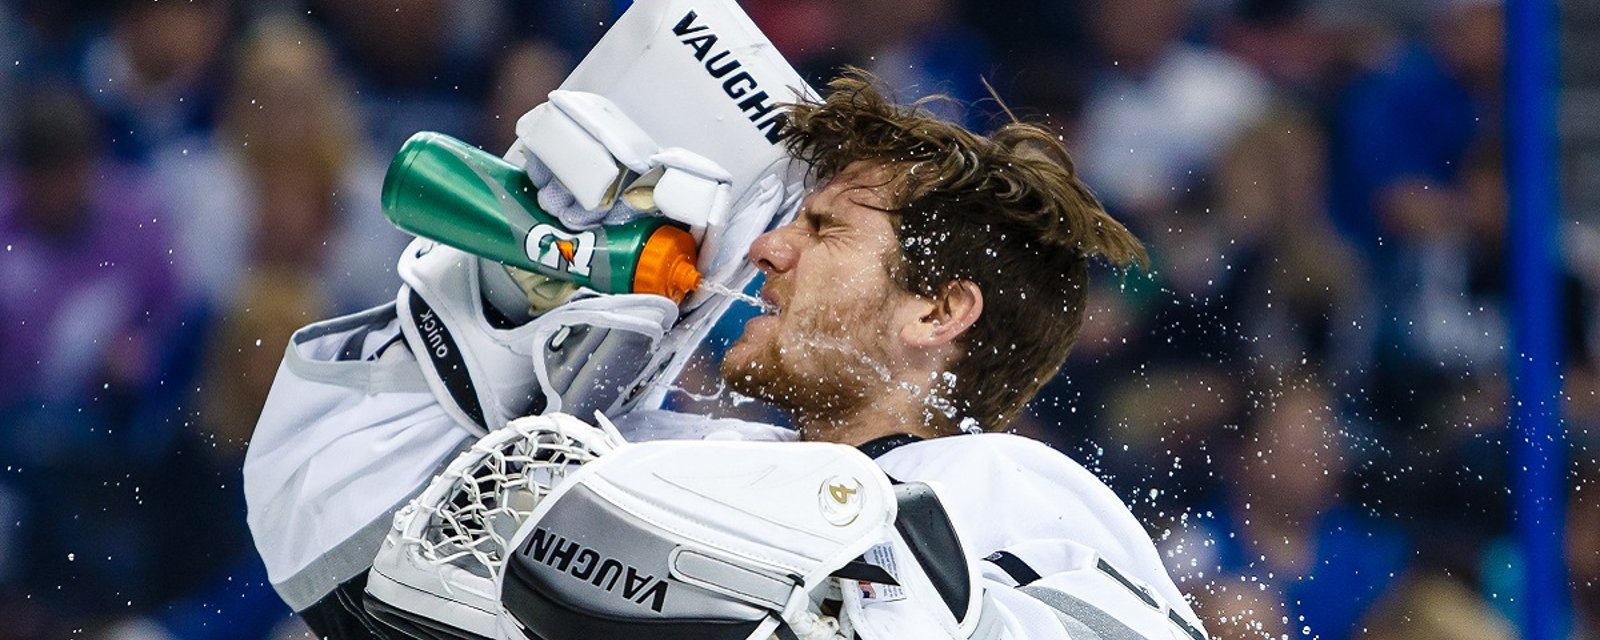 One of the NHL's top goalies appears to suffer serious injury in season opener.